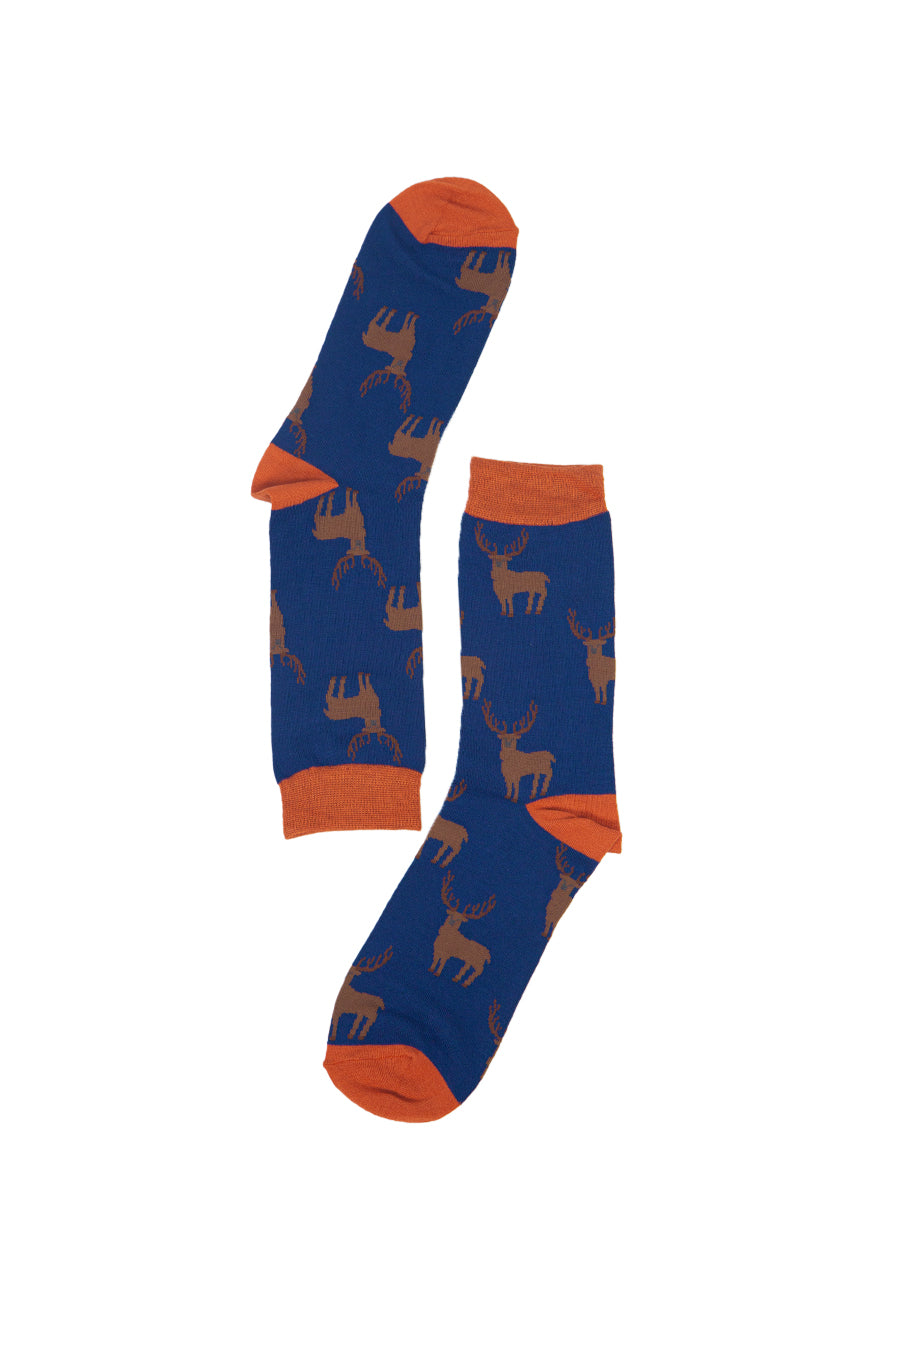 blue dress socks with Stags on them